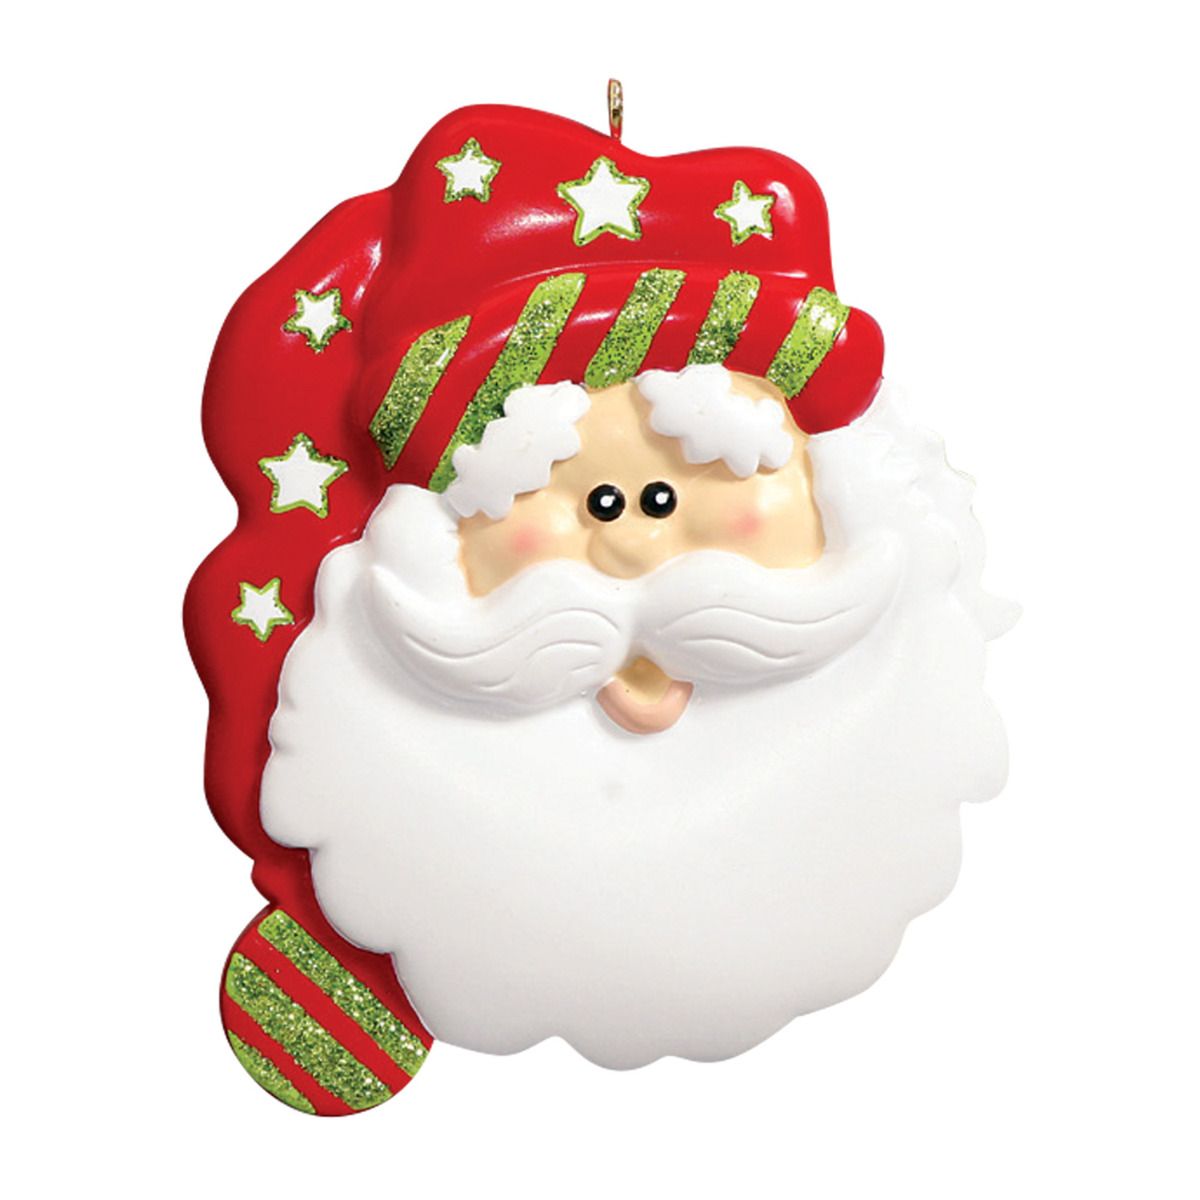 Personalized Santa Face Christmas Tree Ornament 2019 - Cotton White Beard  Papa Claus Red Sleep Hat Star Tradition Baby's Neutral Nursery 1st Visit  Grand-kid Son Daughter Gift - Free Customization